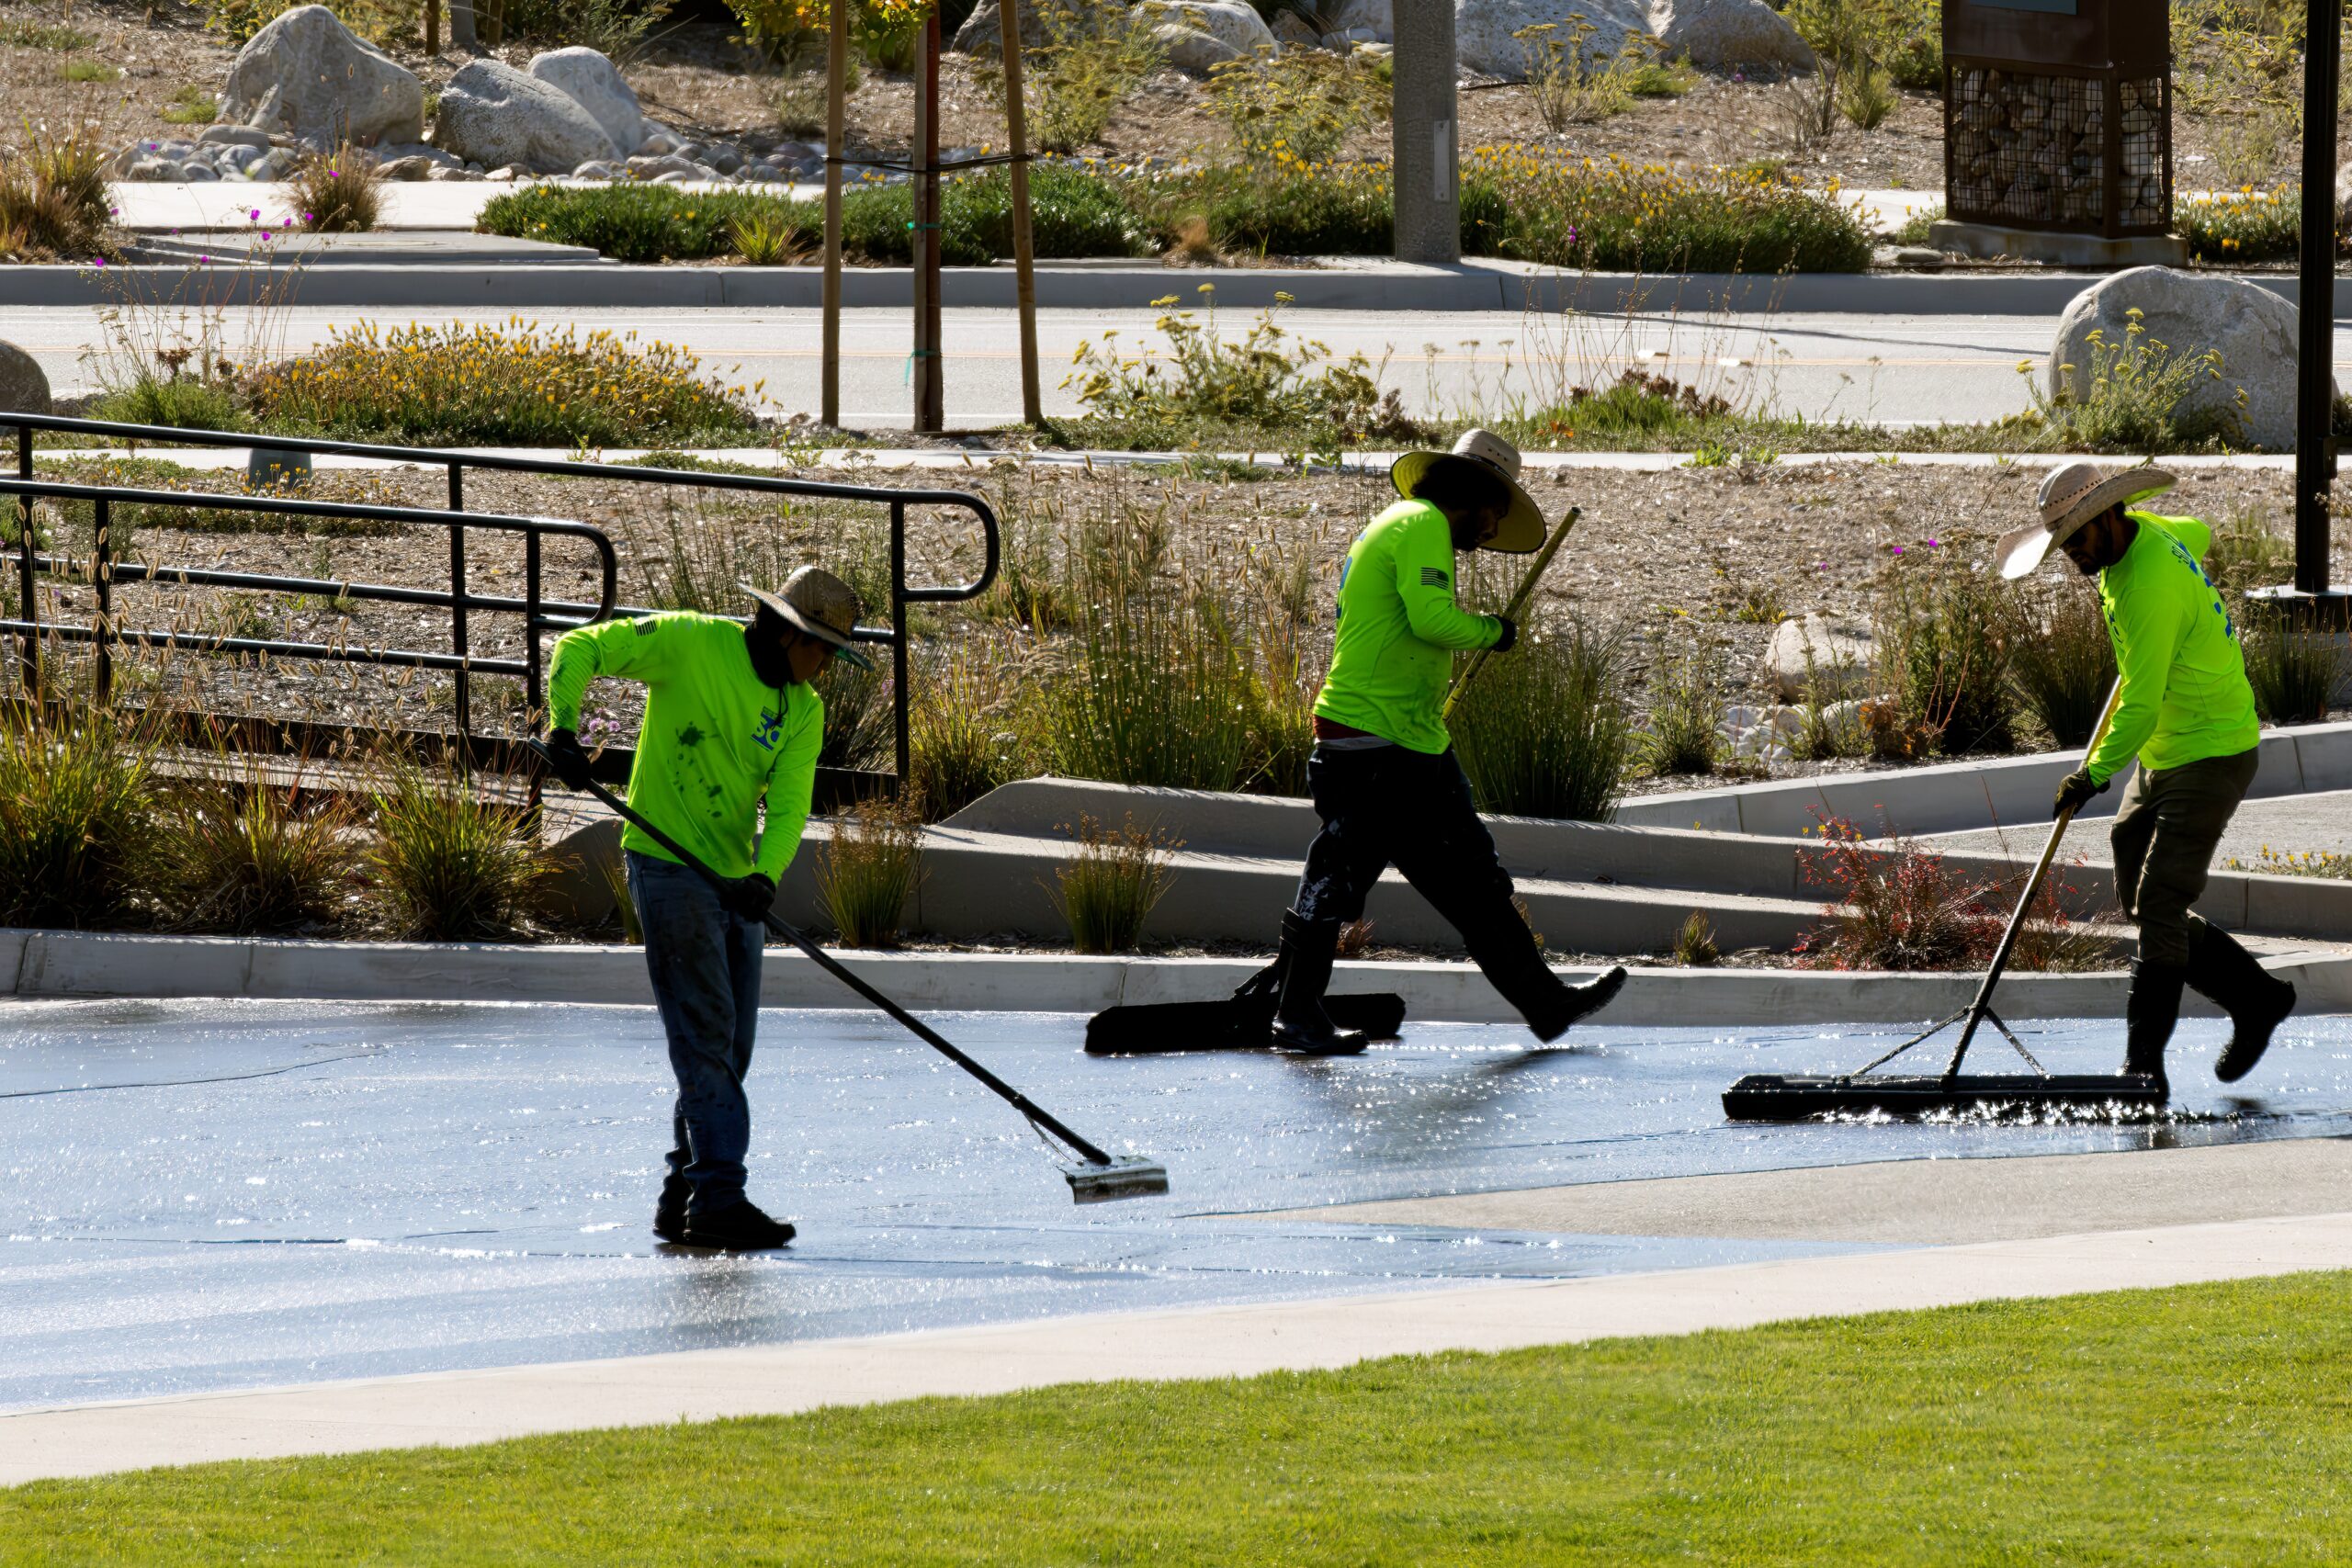 Cleaning roads with the help of Water Broom.